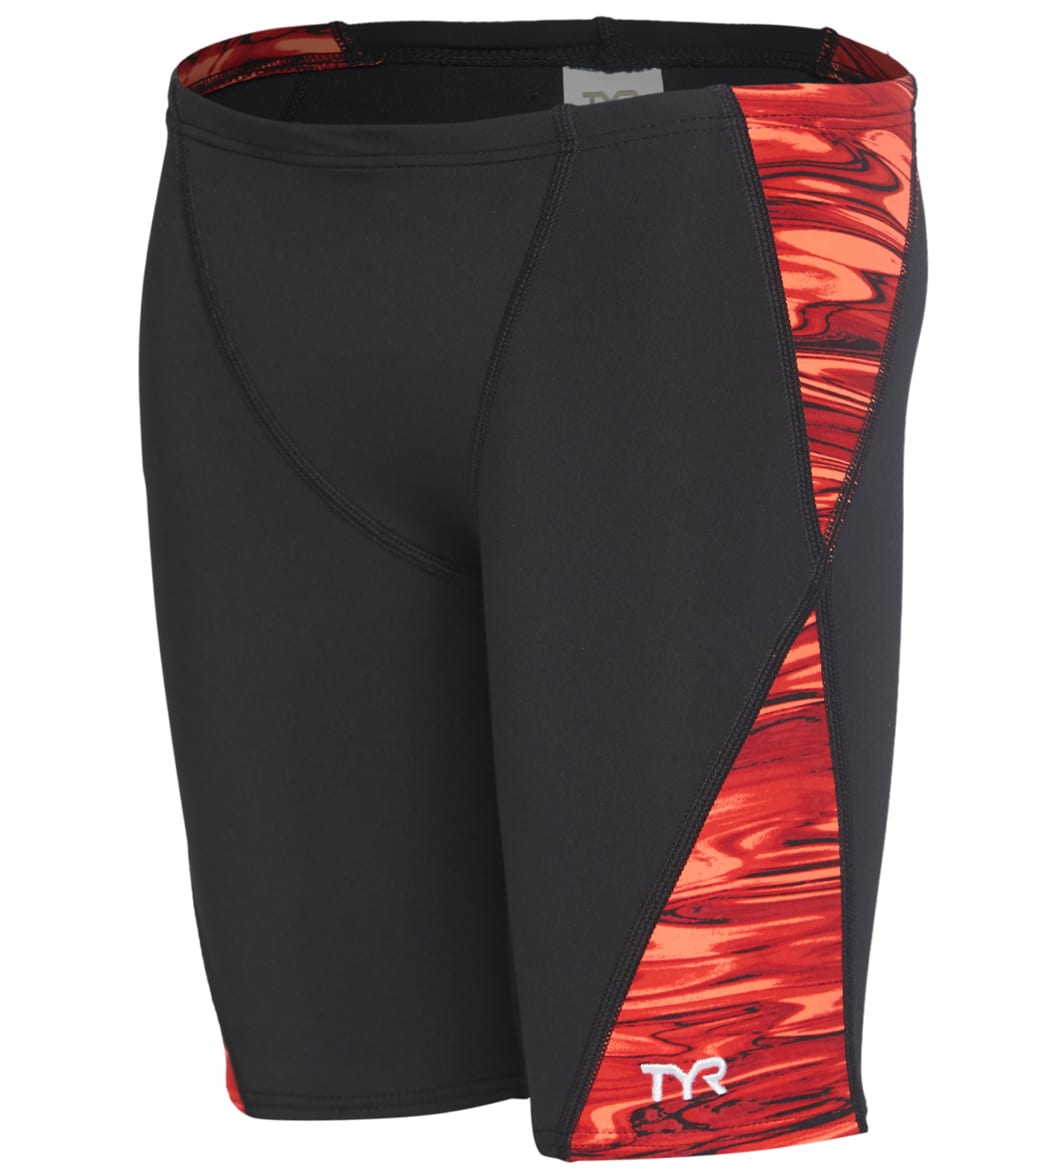 TYR Boys' Hydra Blade Jammer Swimsuit - Red 22 - Swimoutlet.com